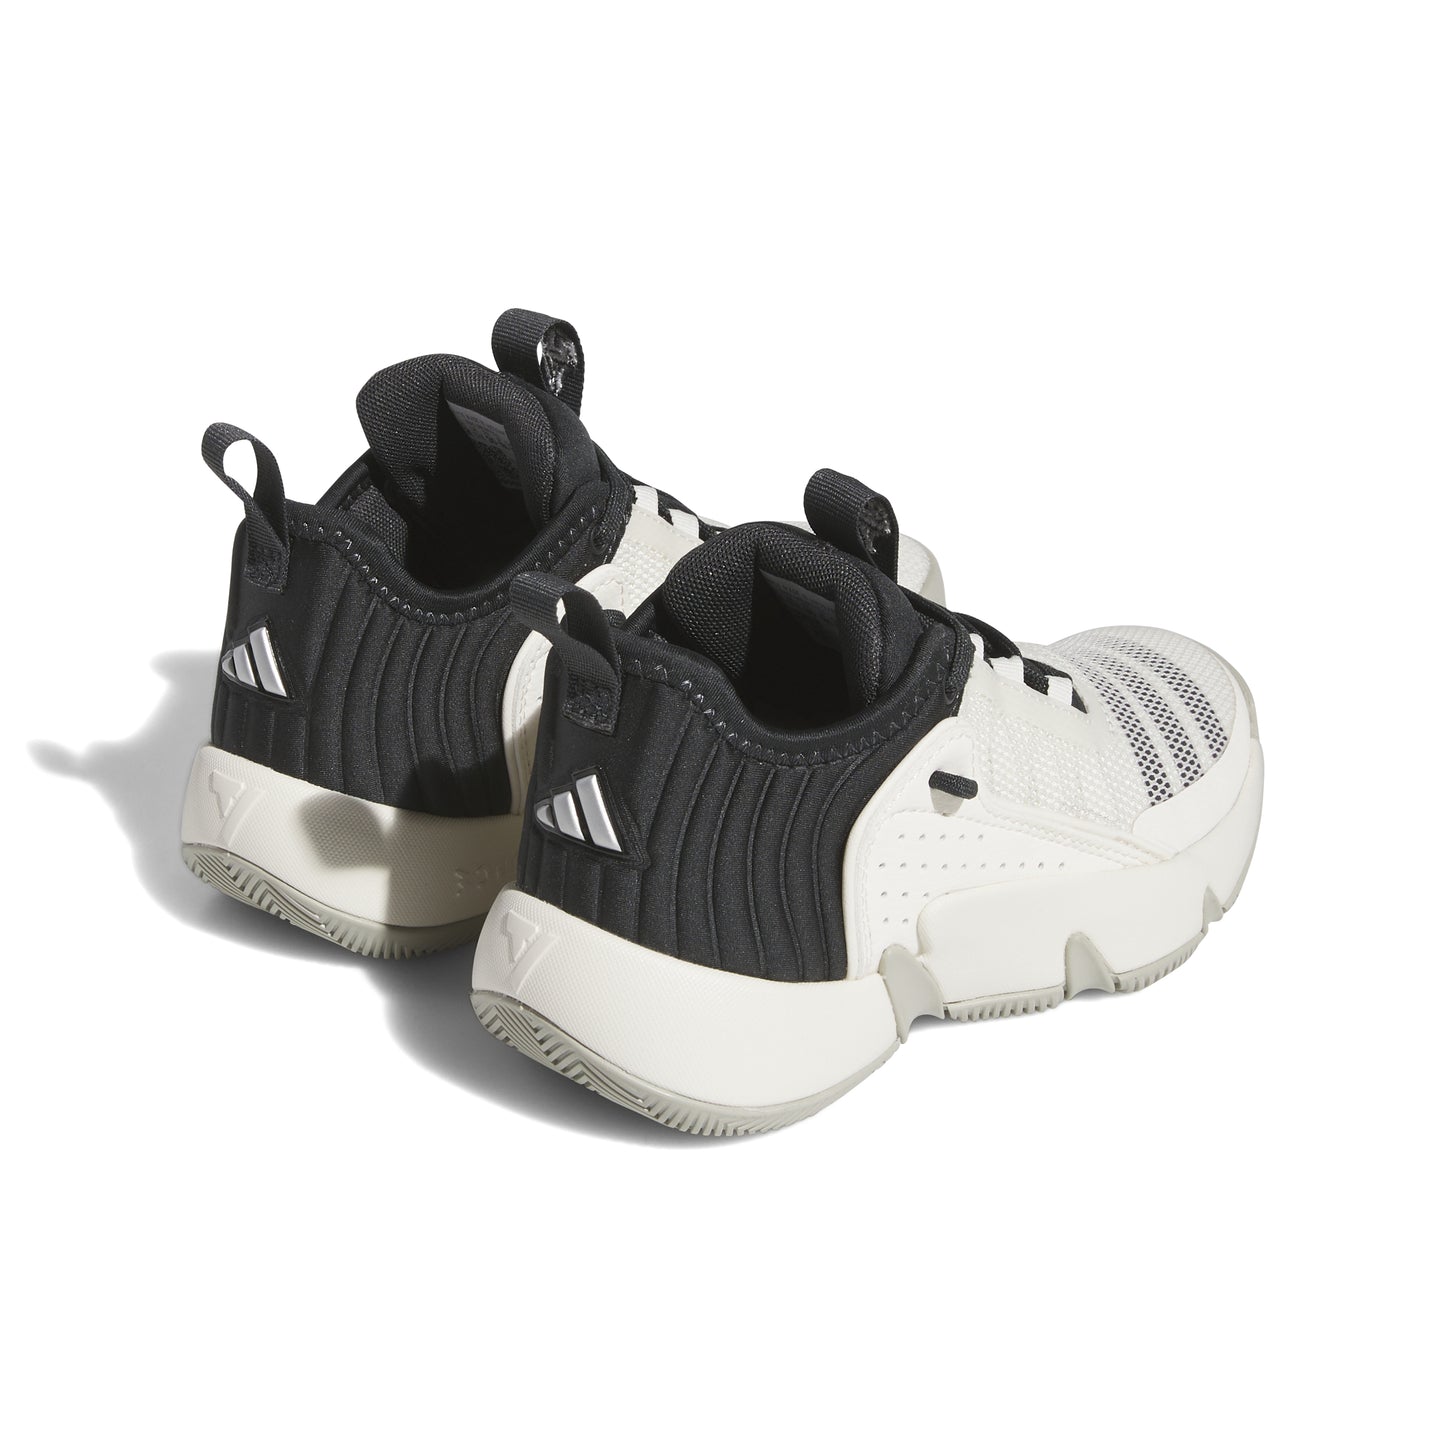 ADIDAS TRAE UNLIMITED SHOES CHILDREN Cloud White